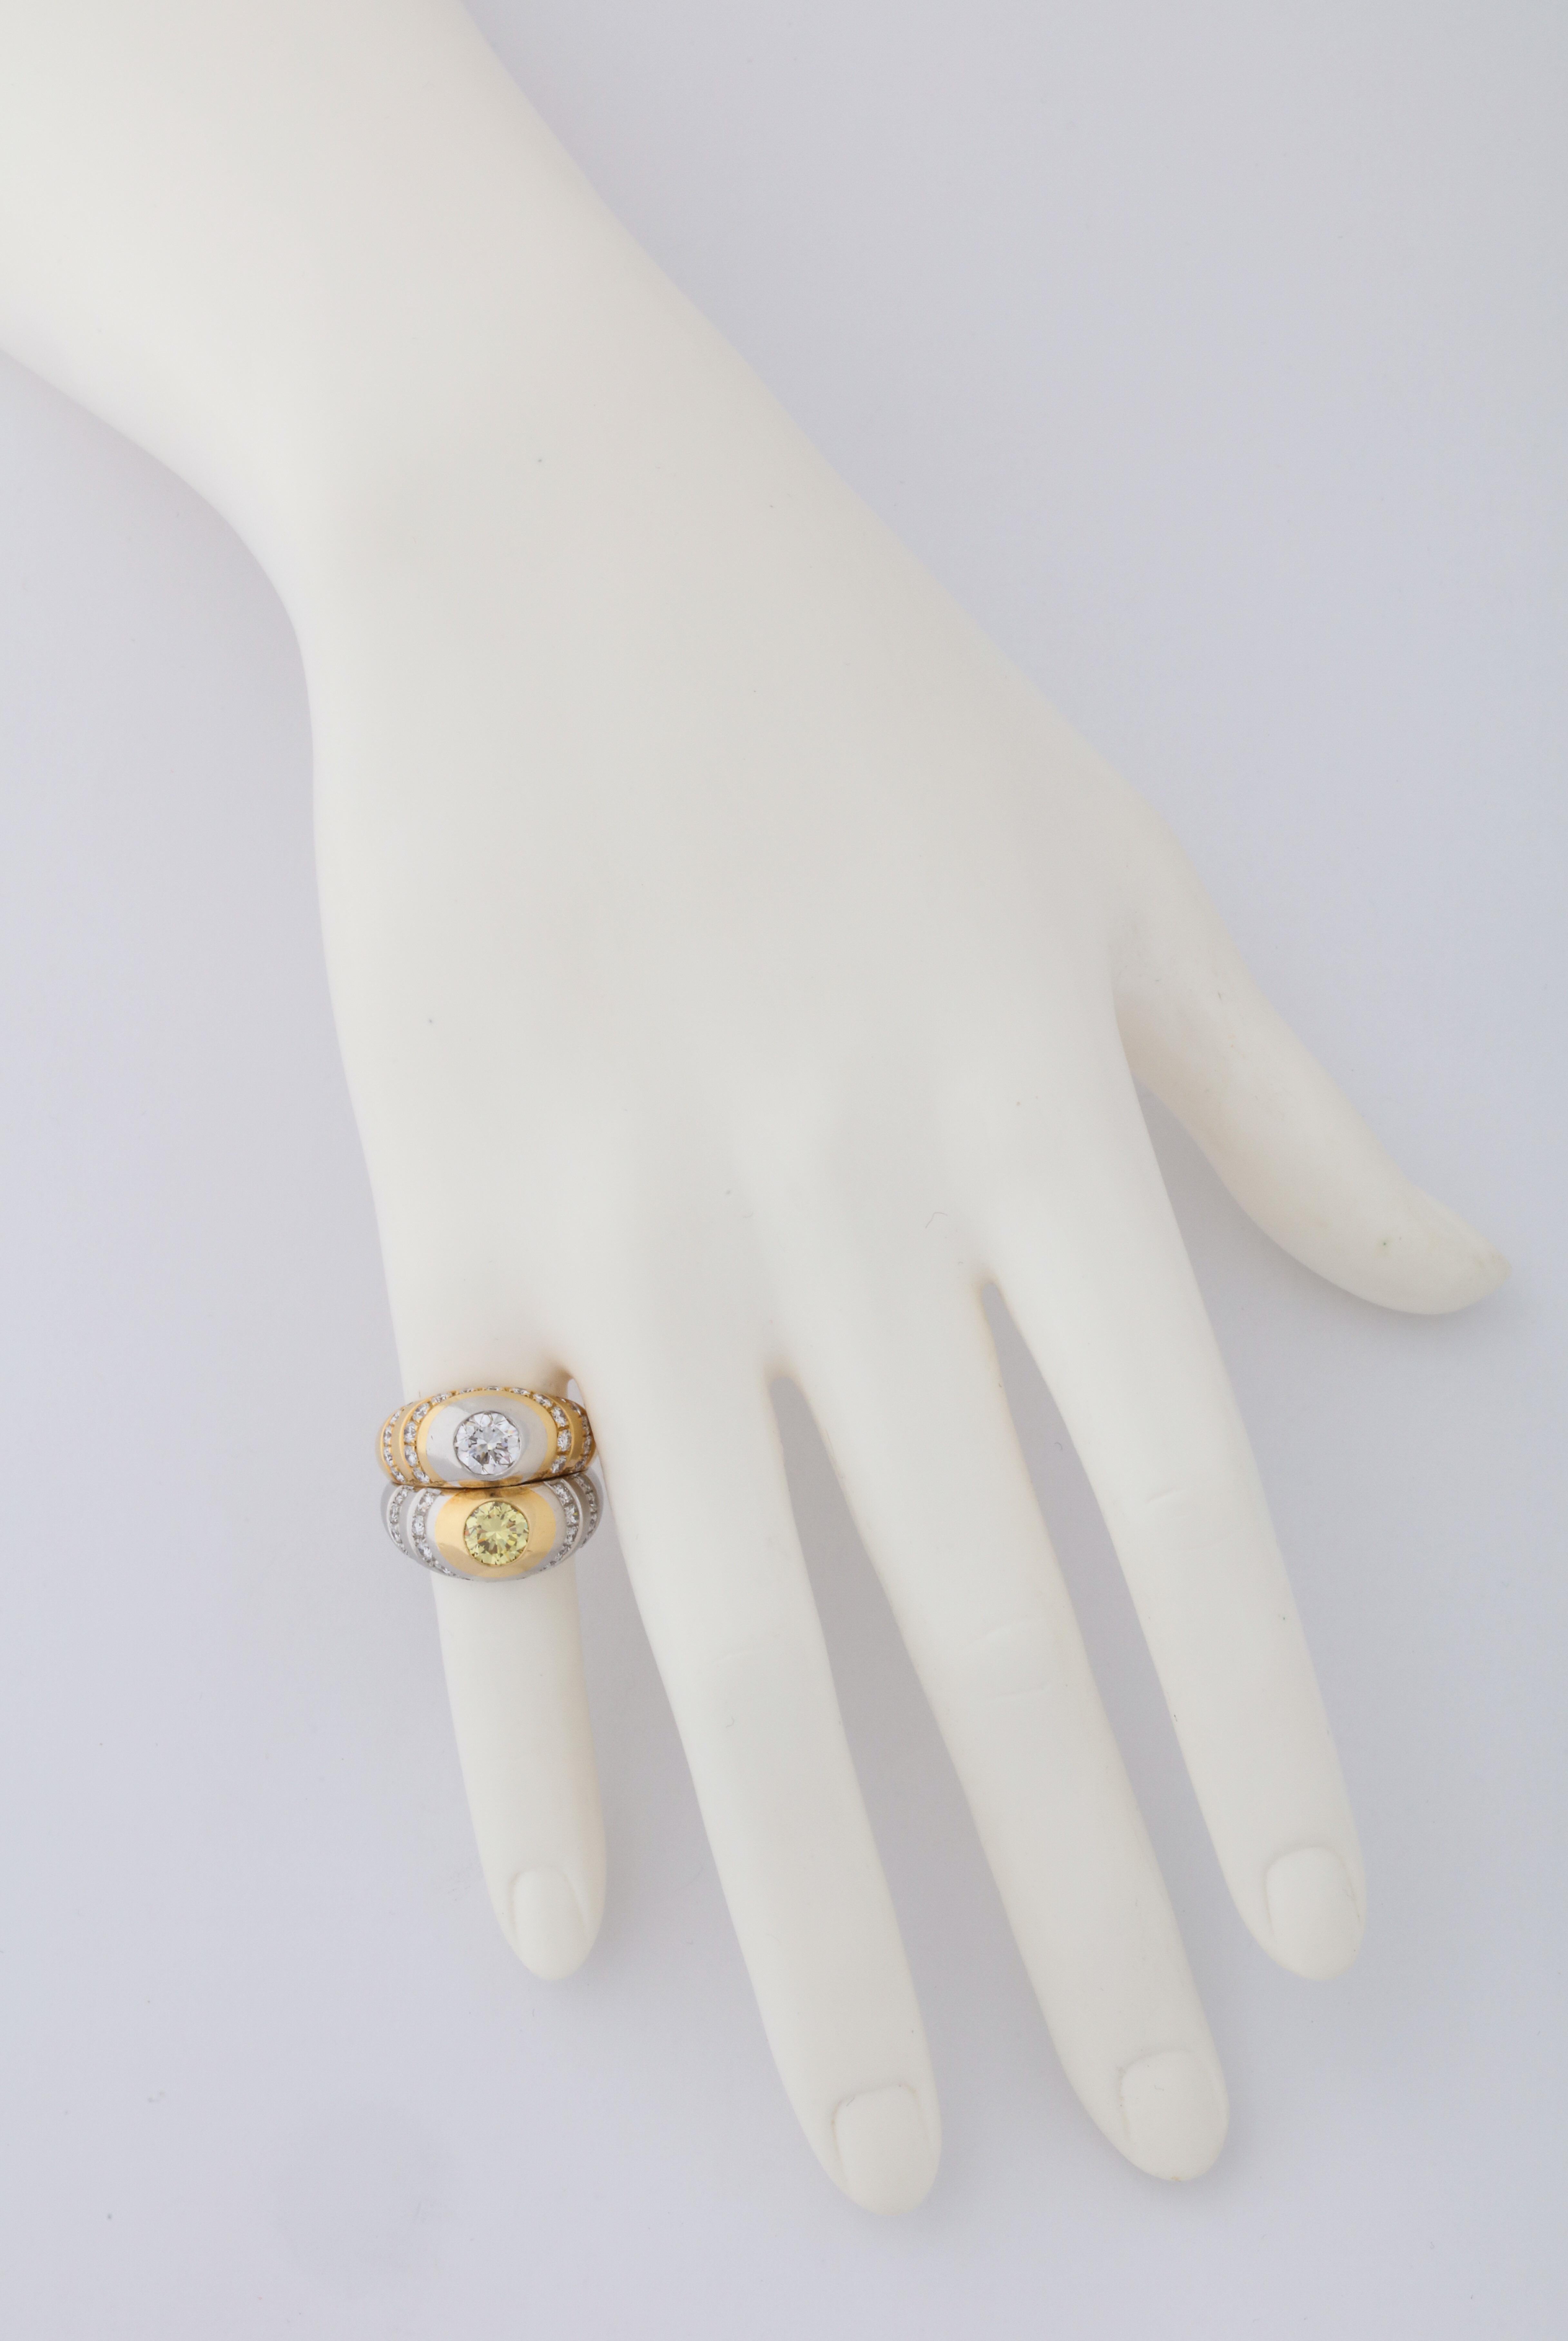 18kt yellow gold and platinum ring featuring a pair of round diamonds- one white (1.01cts) and one yellow (1.09cts), by Bulgari.  Signed, hallmarked and numbered with the diamond weights engraved on the inside of the ring.  A unique, and likely one